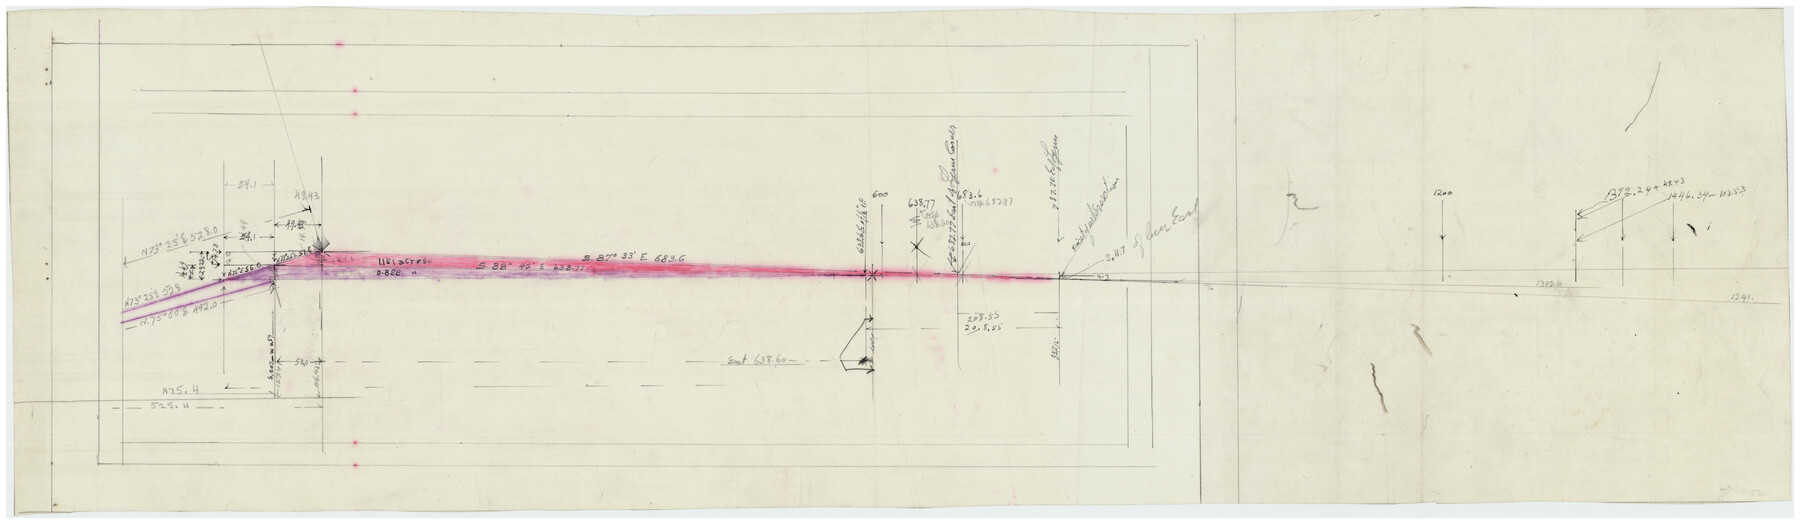 91265, [Vicinity and related to the Wilson Strickland Survey], Twichell Survey Records